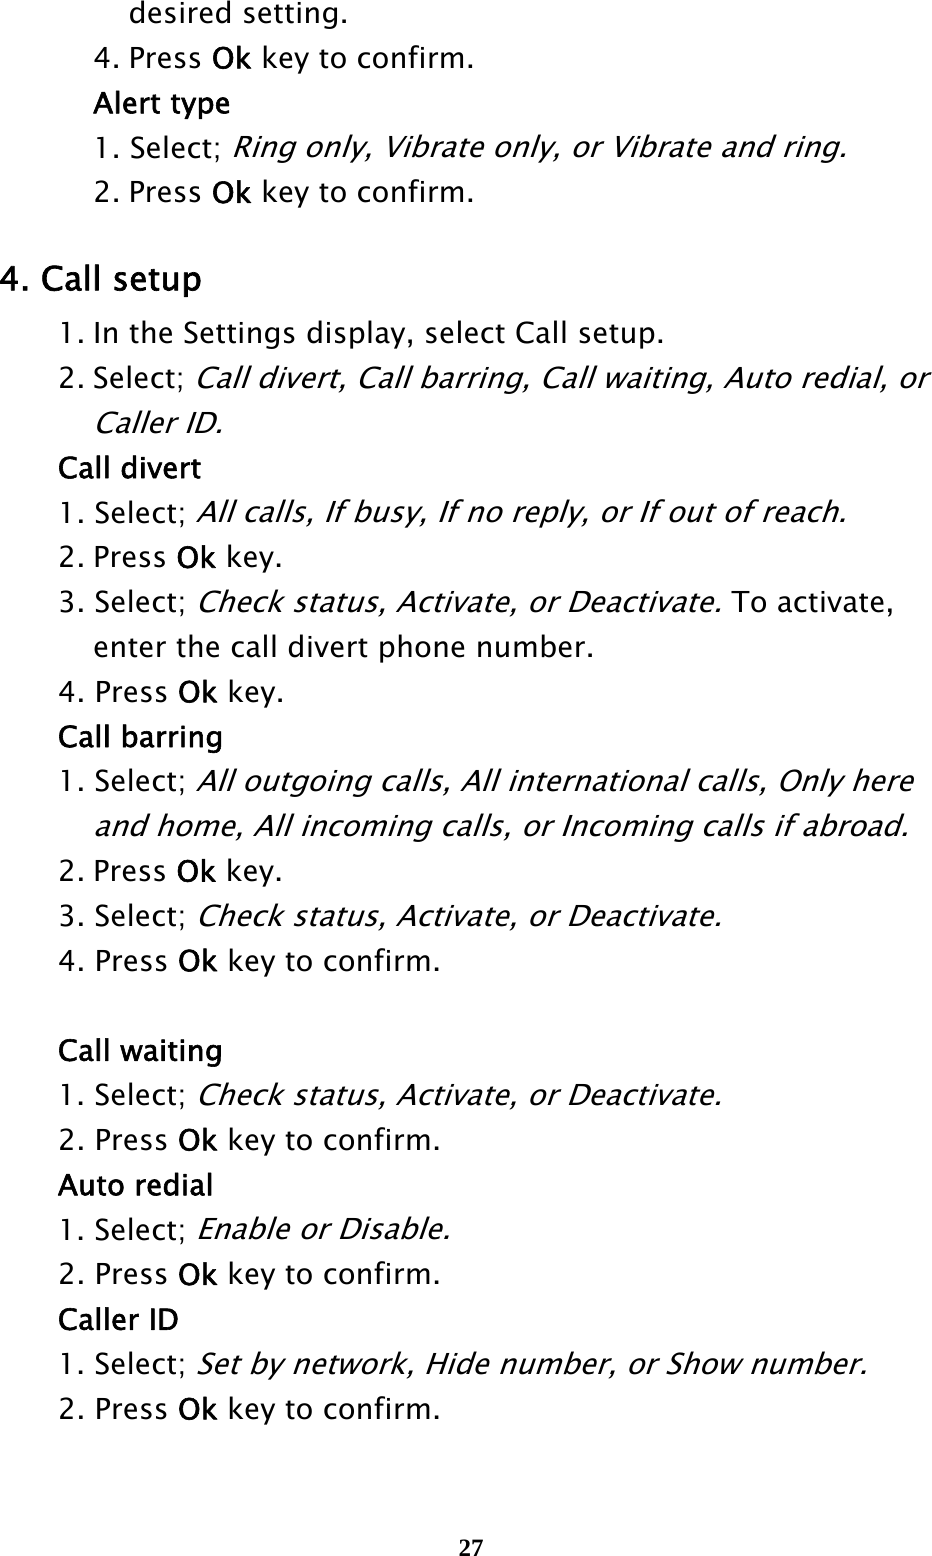  27    desired setting.   4. Press Ok key to confirm.    Alert type   1. Select; Ring only, Vibrate only, or Vibrate and ring.   2. Press Ok key to confirm.  4. Call setup   1. In the Settings display, select Call setup.  2. Select; Call divert, Call barring, Call waiting, Auto redial, or     Caller ID.  Call divert  1. Select; All calls, If busy, If no reply, or If out of reach.    2. Press Ok key.  3. Select; Check status, Activate, or Deactivate. To activate,       enter the call divert phone number.  4. Press Ok key.  Call barring  1. Select; All outgoing calls, All international calls, Only here       and home, All incoming calls, or Incoming calls if abroad.    2. Press Ok key.  3. Select; Check status, Activate, or Deactivate.   4. Press Ok key to confirm.   Call waiting    1. Select; Check status, Activate, or Deactivate.   2. Press Ok key to confirm.  Auto redial    1. Select; Enable or Disable.     2. Press Ok key to confirm.  Caller ID    1. Select; Set by network, Hide number, or Show number.     2. Press Ok key to confirm. 